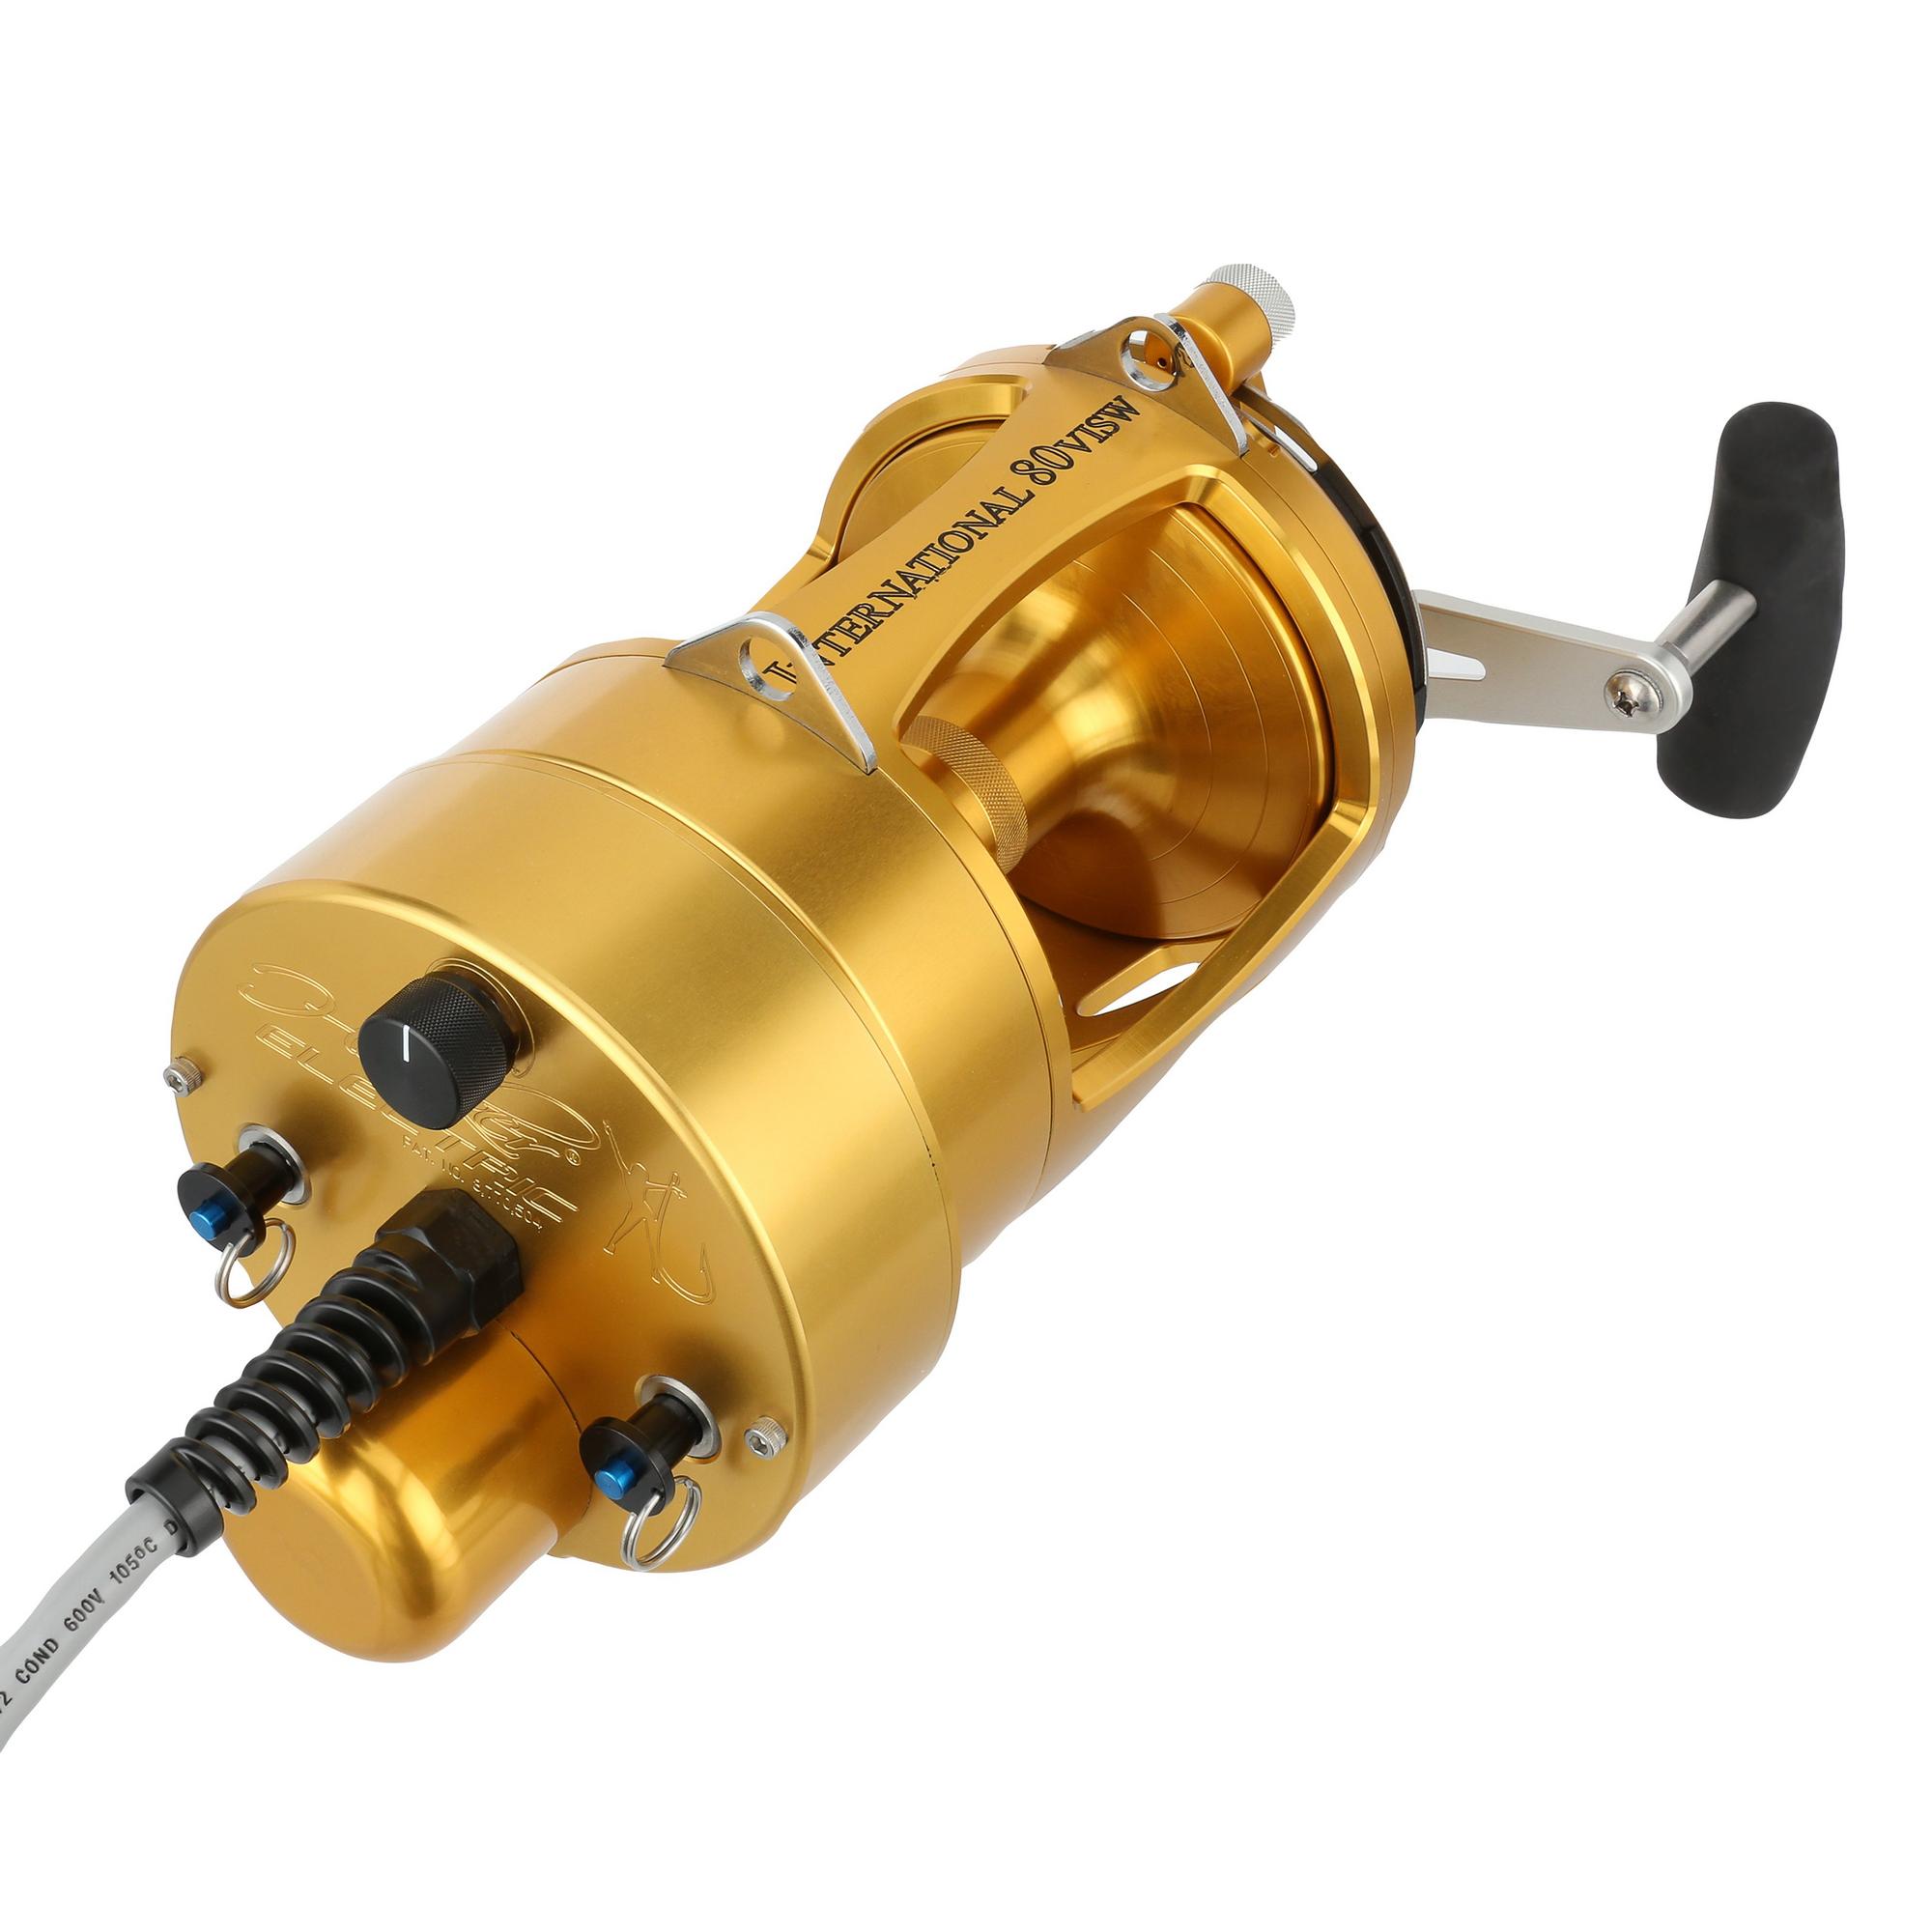 PENN International VI Hooker Electric 80 VISW Autostop Gold with FREE CHAOS  SW Series Rod and FREE Spooling from PENN/CHAOS - CHAOS Fishing